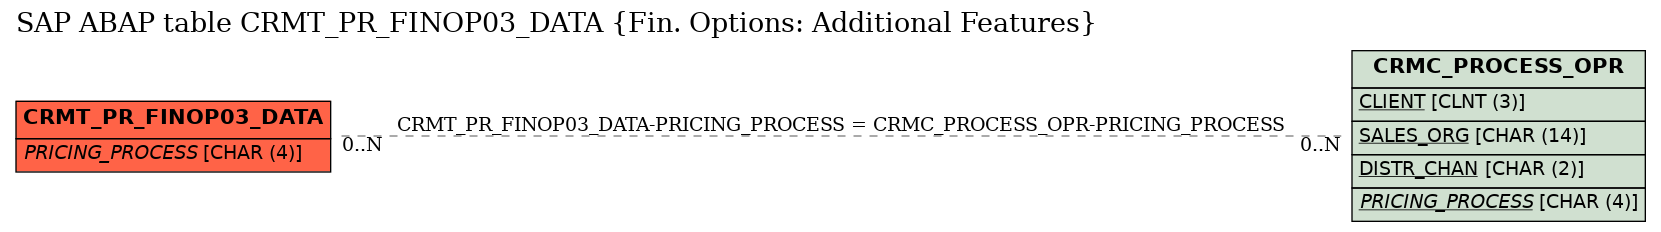 E-R Diagram for table CRMT_PR_FINOP03_DATA (Fin. Options: Additional Features)